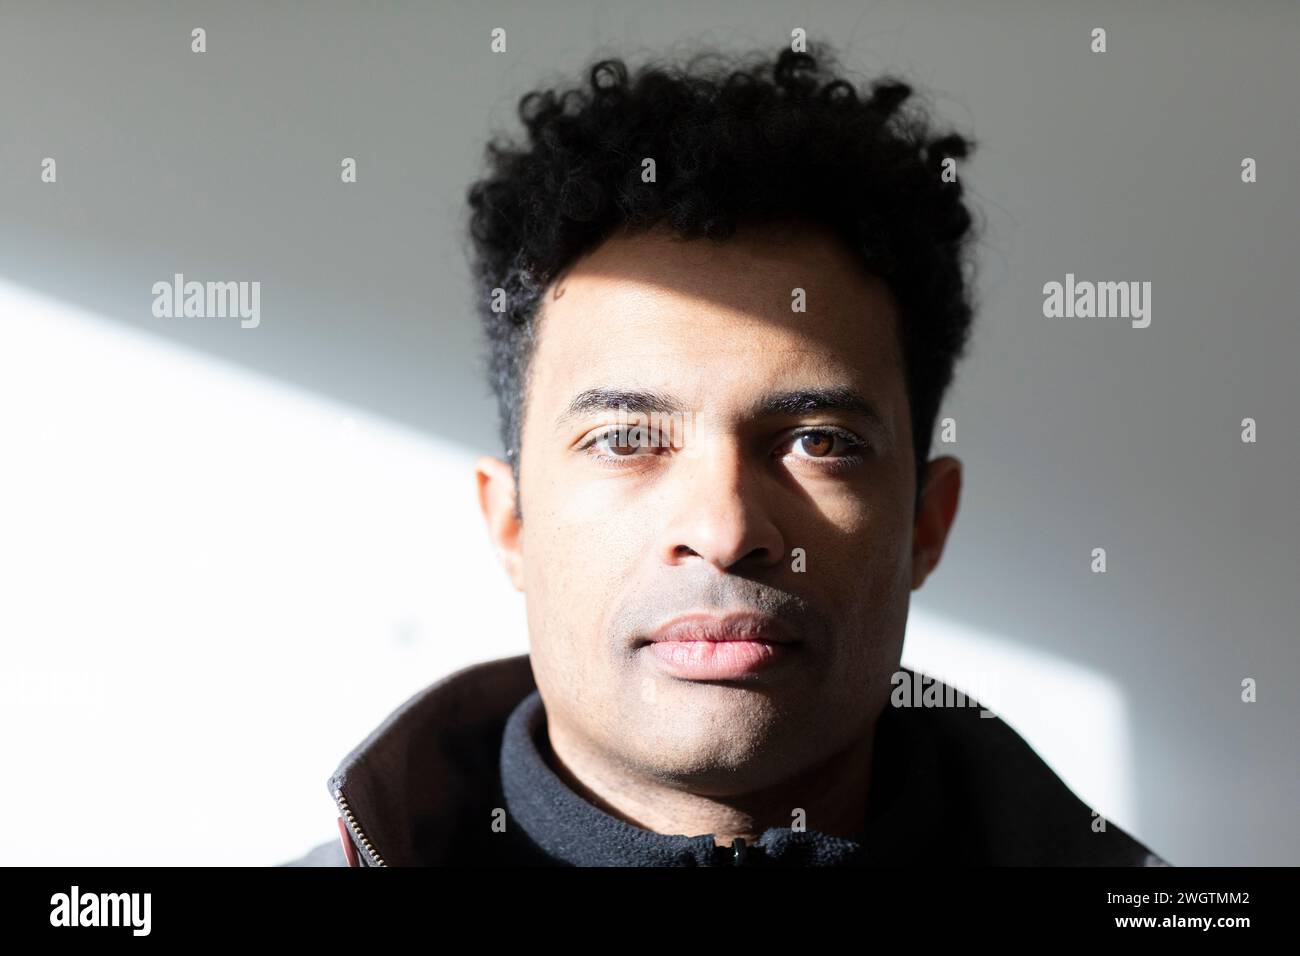 Portrait of young man of mixed race Stock Photo